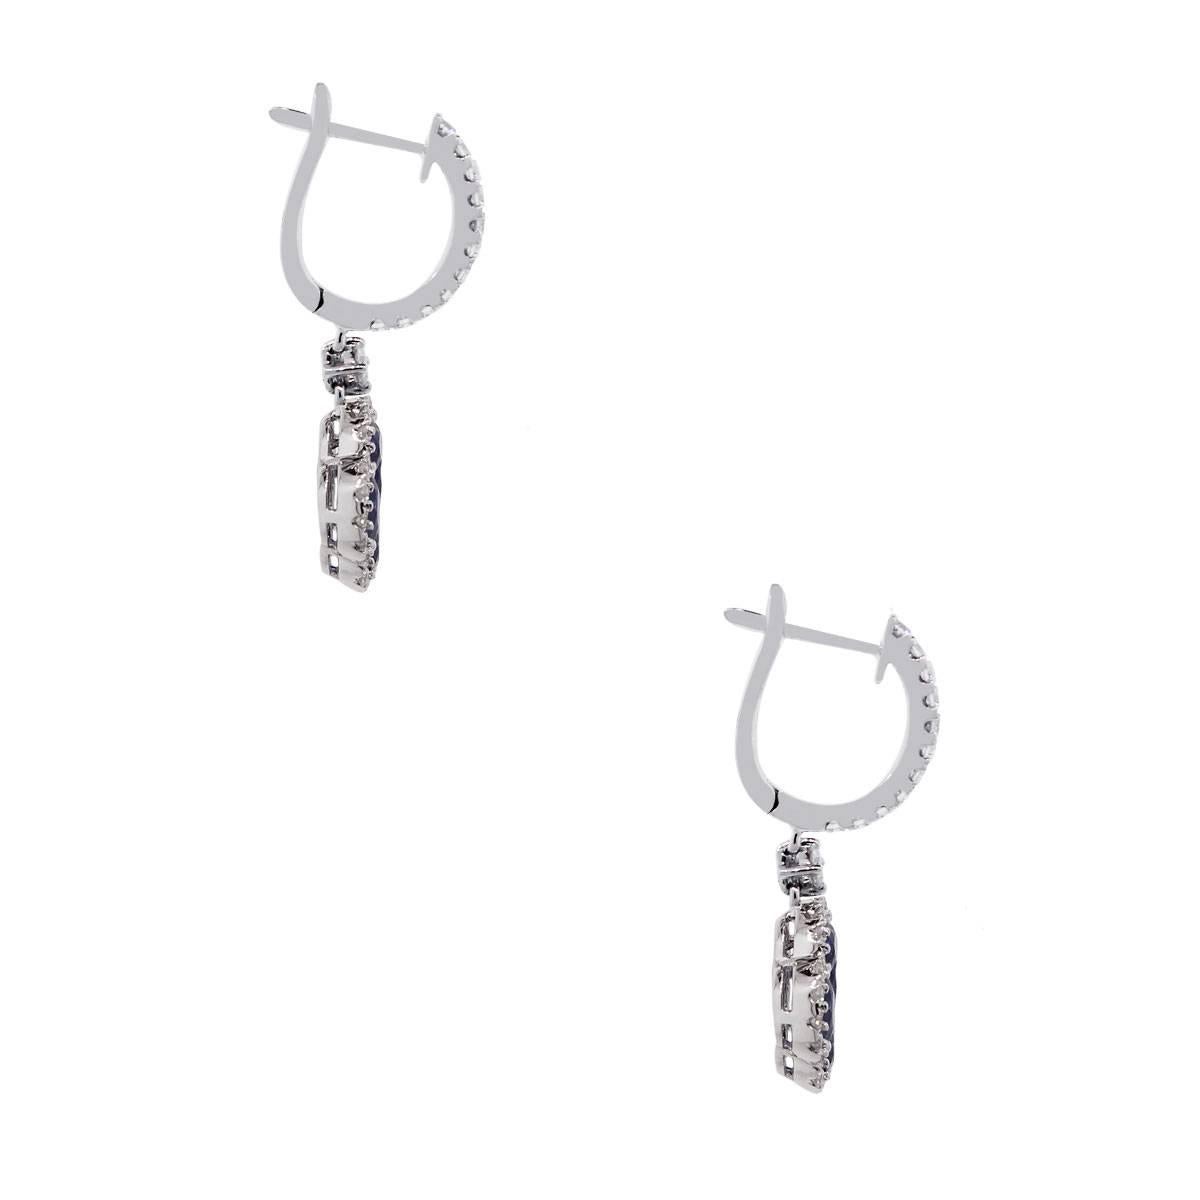 Material: 18k white gold
Diamond Details: Approximately 0.54ctw round brilliant cut diamonds. Diamonds are G/H in color and VS in clarity.
Gemstone Details: Approximately 1.94ctw sapphire gemstones.
Earring Measurements: 0.45″ x 0.15″ x